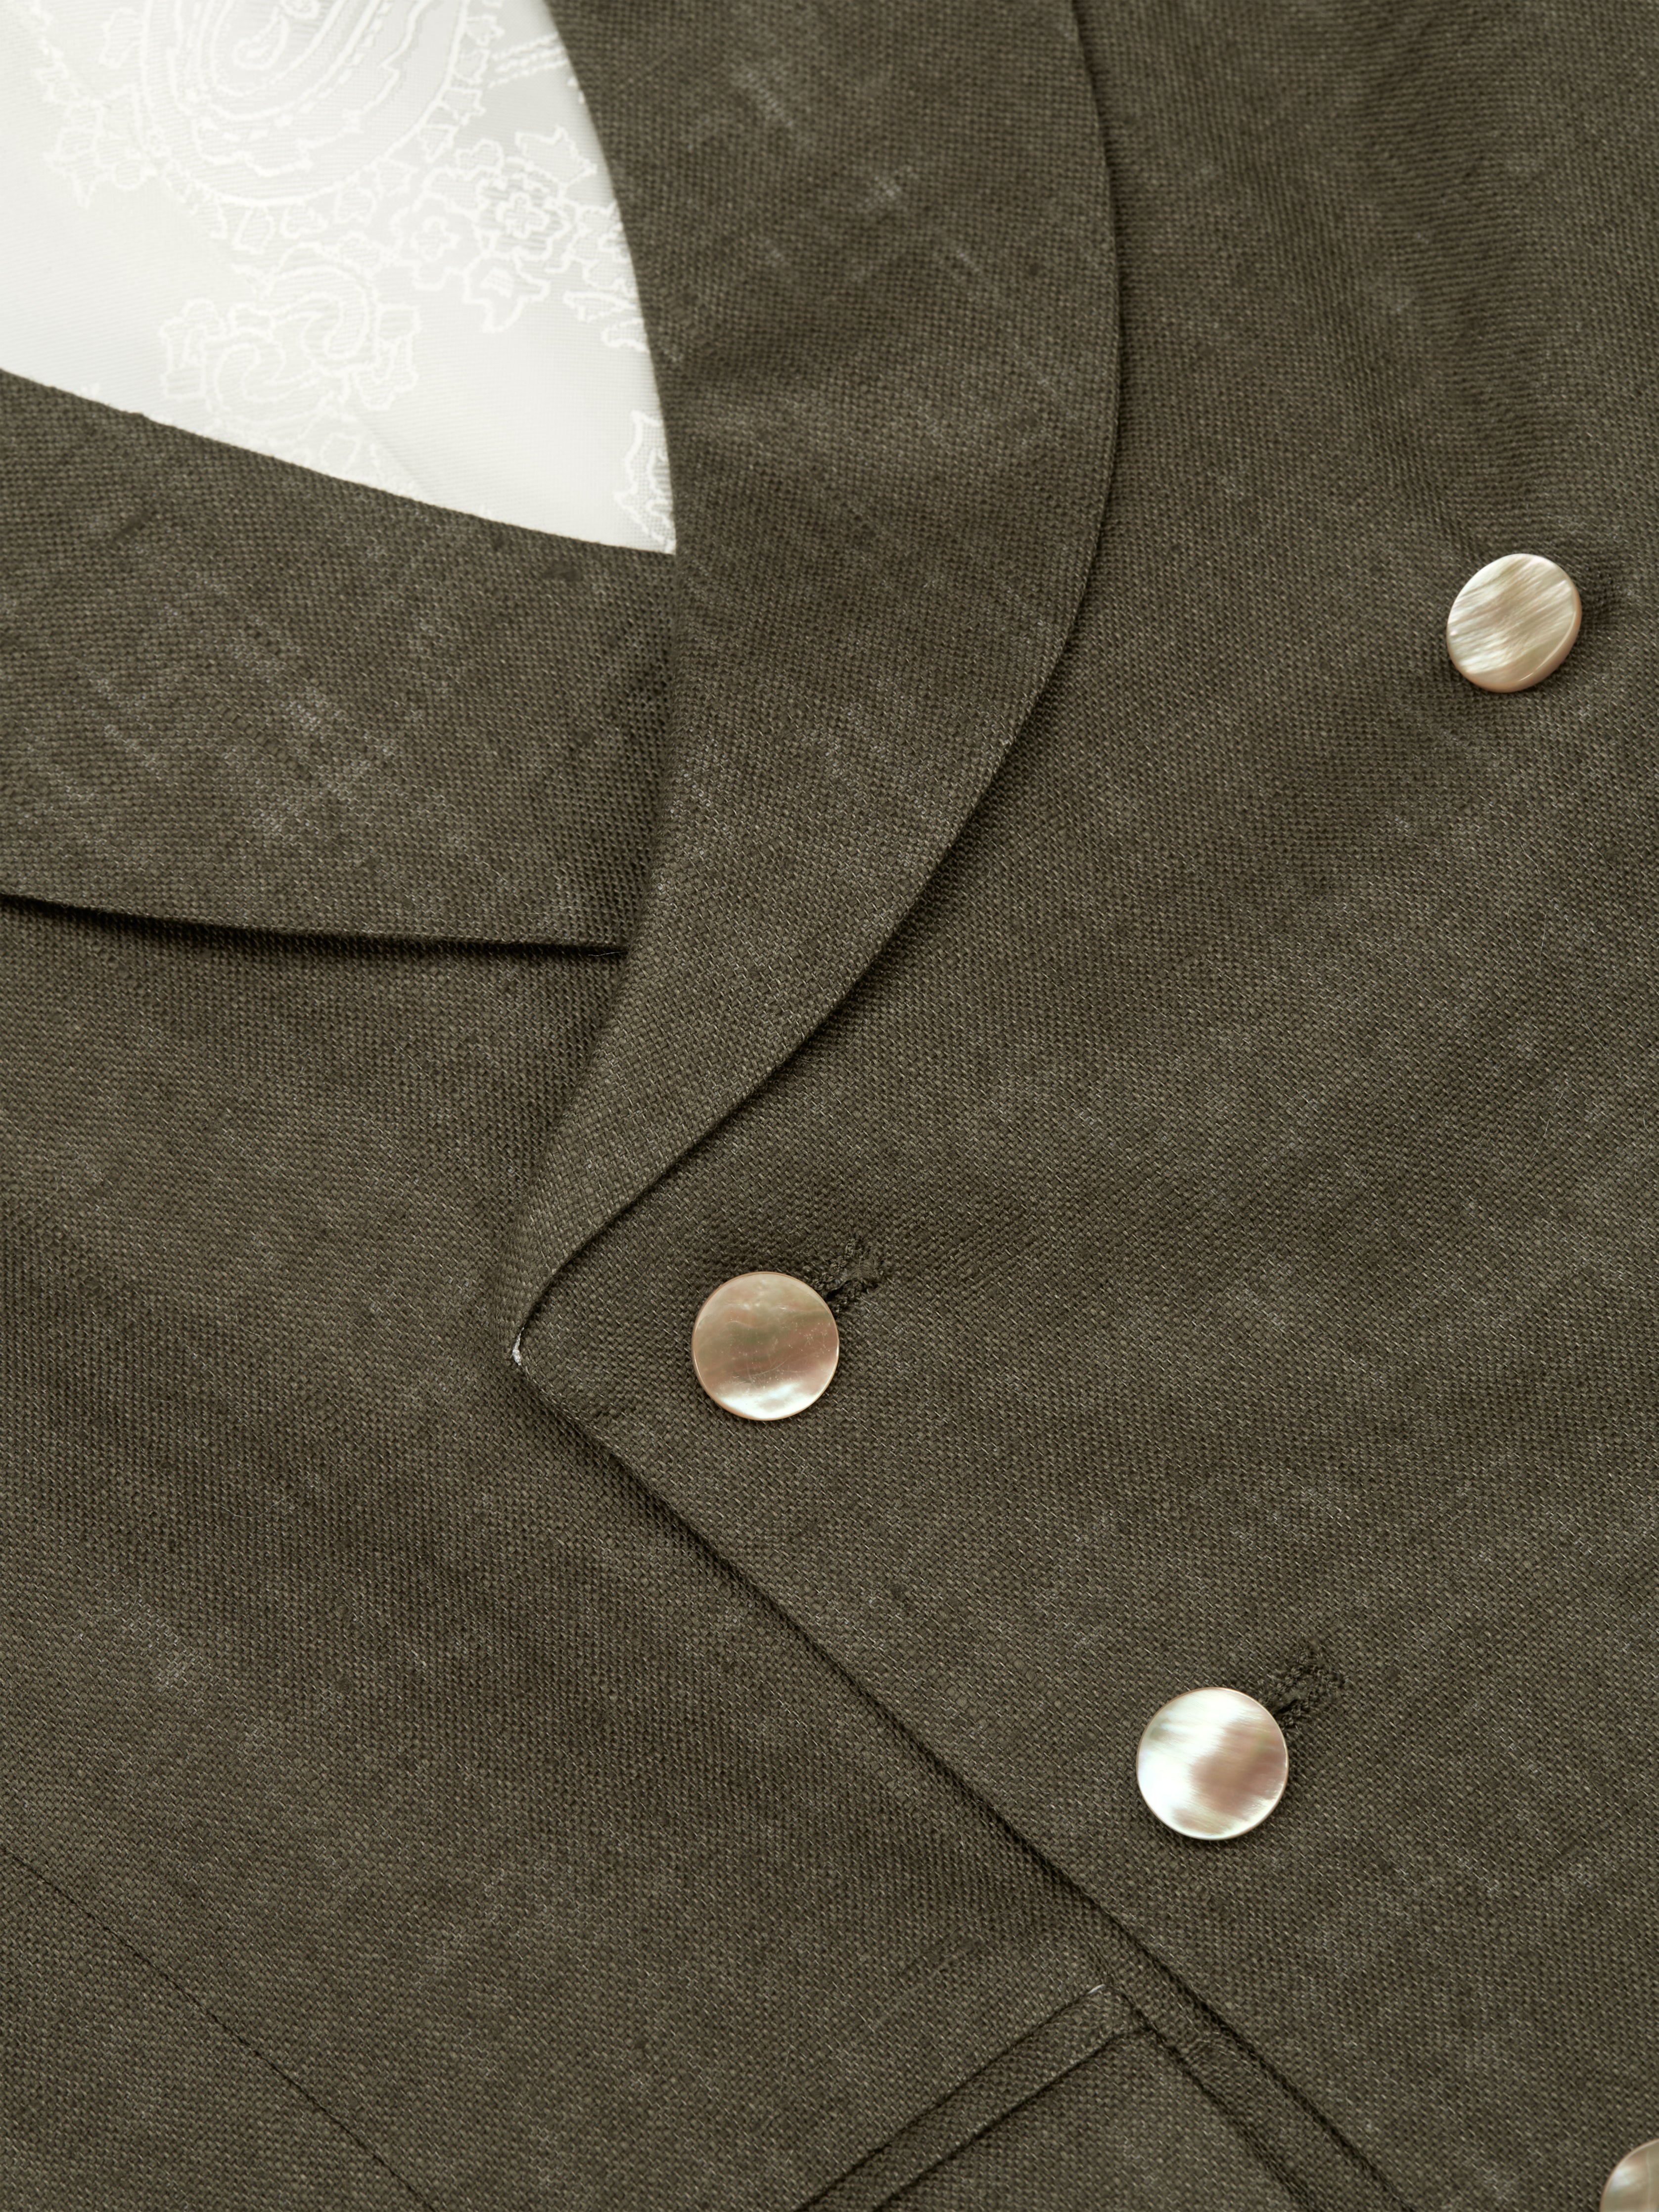 Green Padworth Linen Double Breasted 8 Button Shawl Lapel Waistcoat